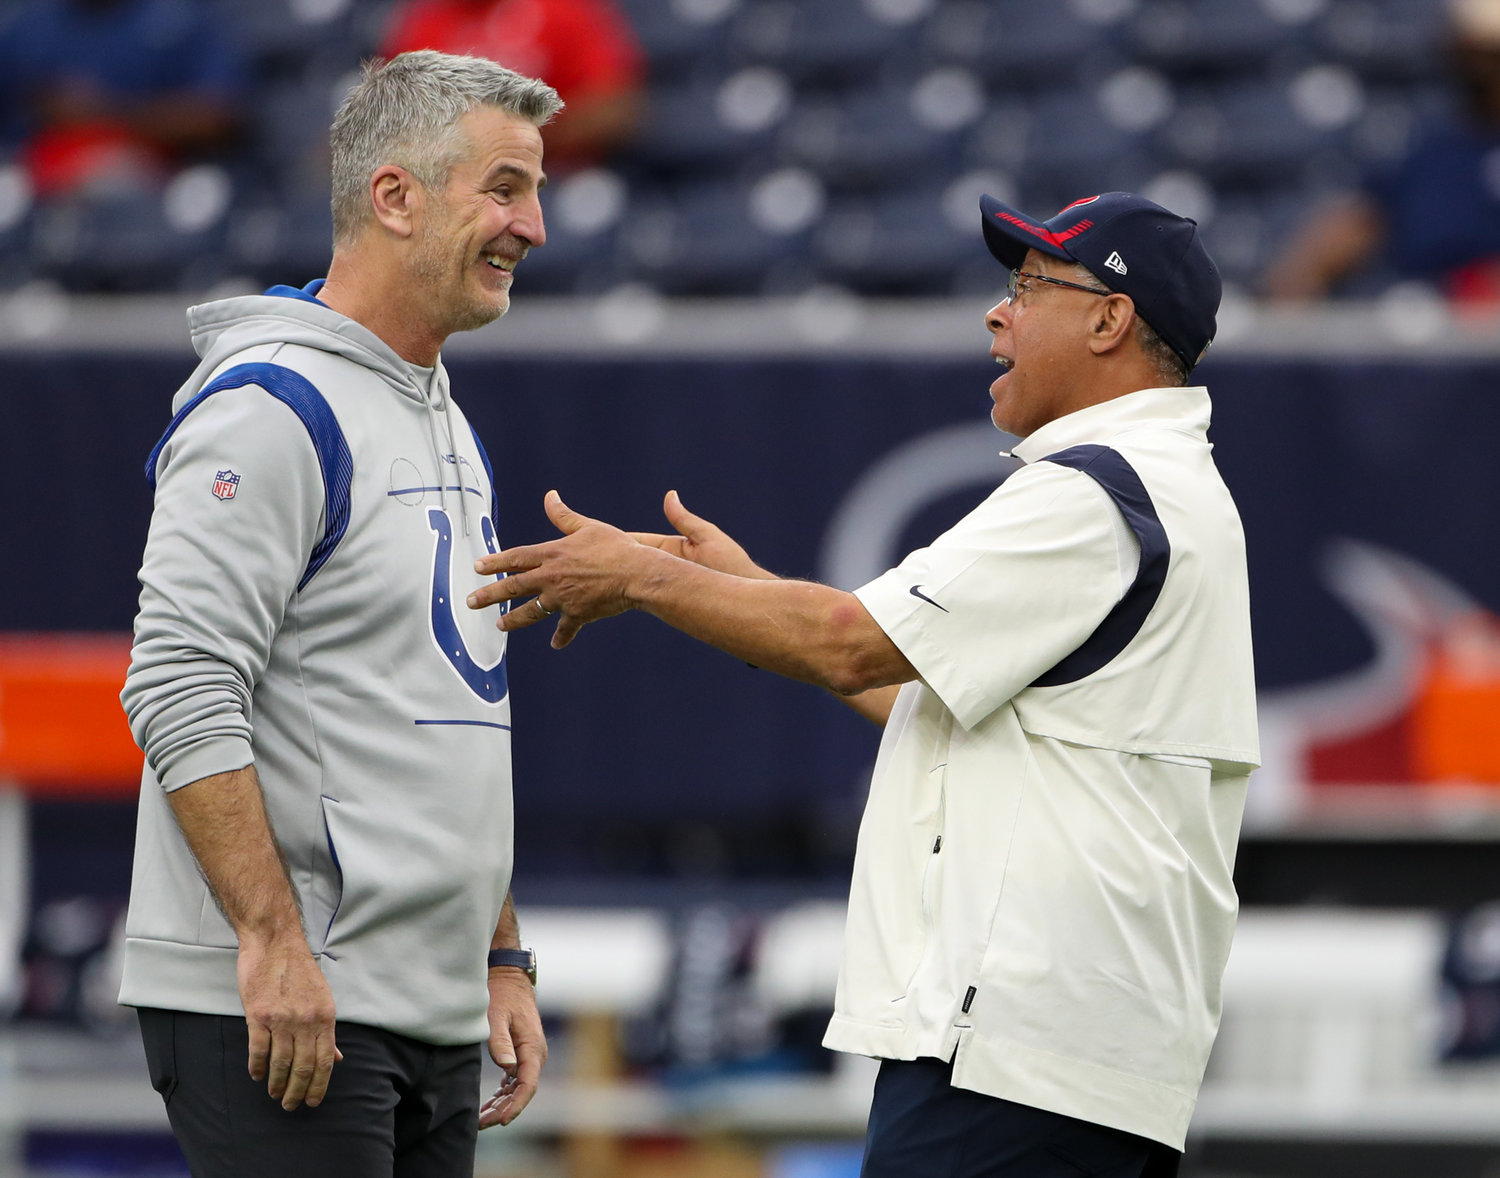 Indianapolis Colts head coach Frank Reich (left) talks with Houston Texans head coach David Culley before the start of an NFL game between the Texans and the Colts on December 5, 2021 in Houston, Texas.